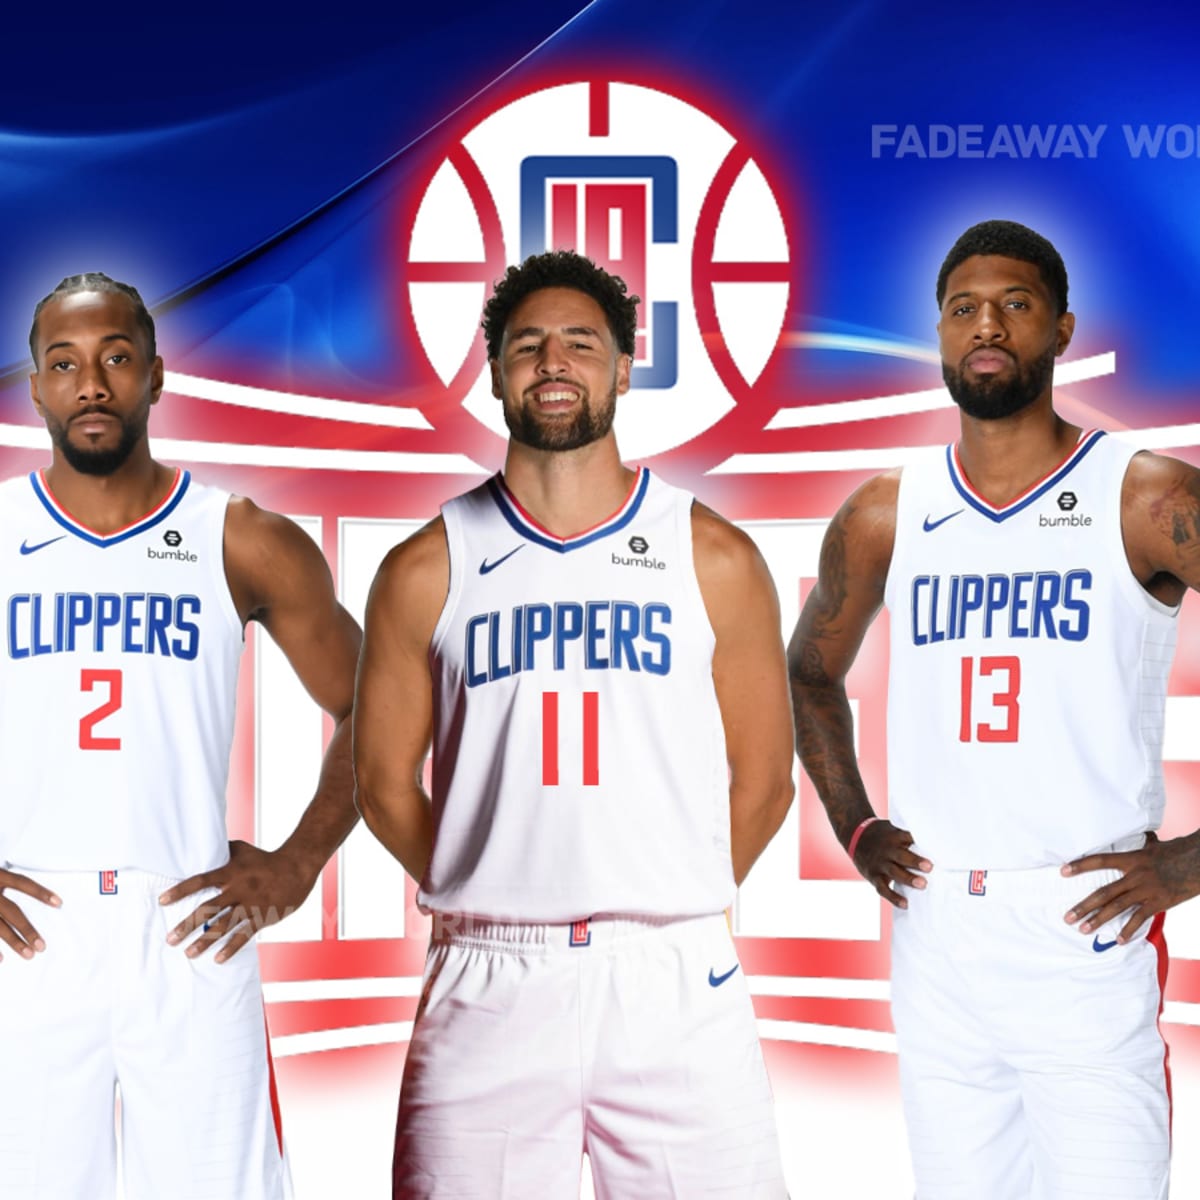 Clippers promote women-first dating app Bumble with new jersey patch